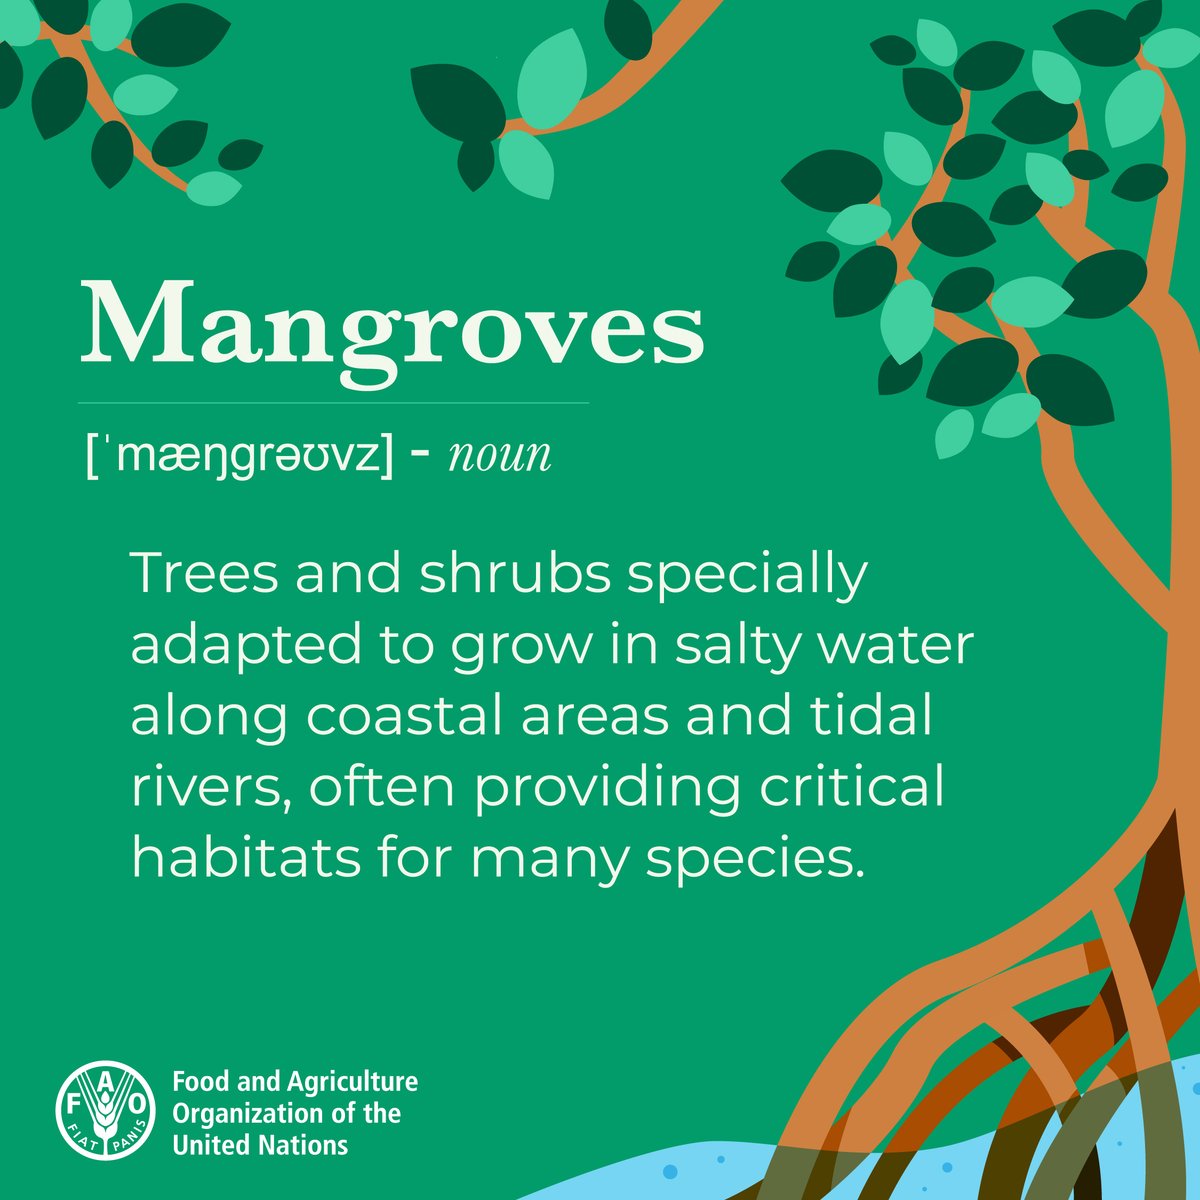 Mangroves provide:

🪵 wood
🦀 food
💊 medicines
... & are essential for the nutrition & food security of millions.

🤔 But what exactly are they?

#WorldWetlandsDay